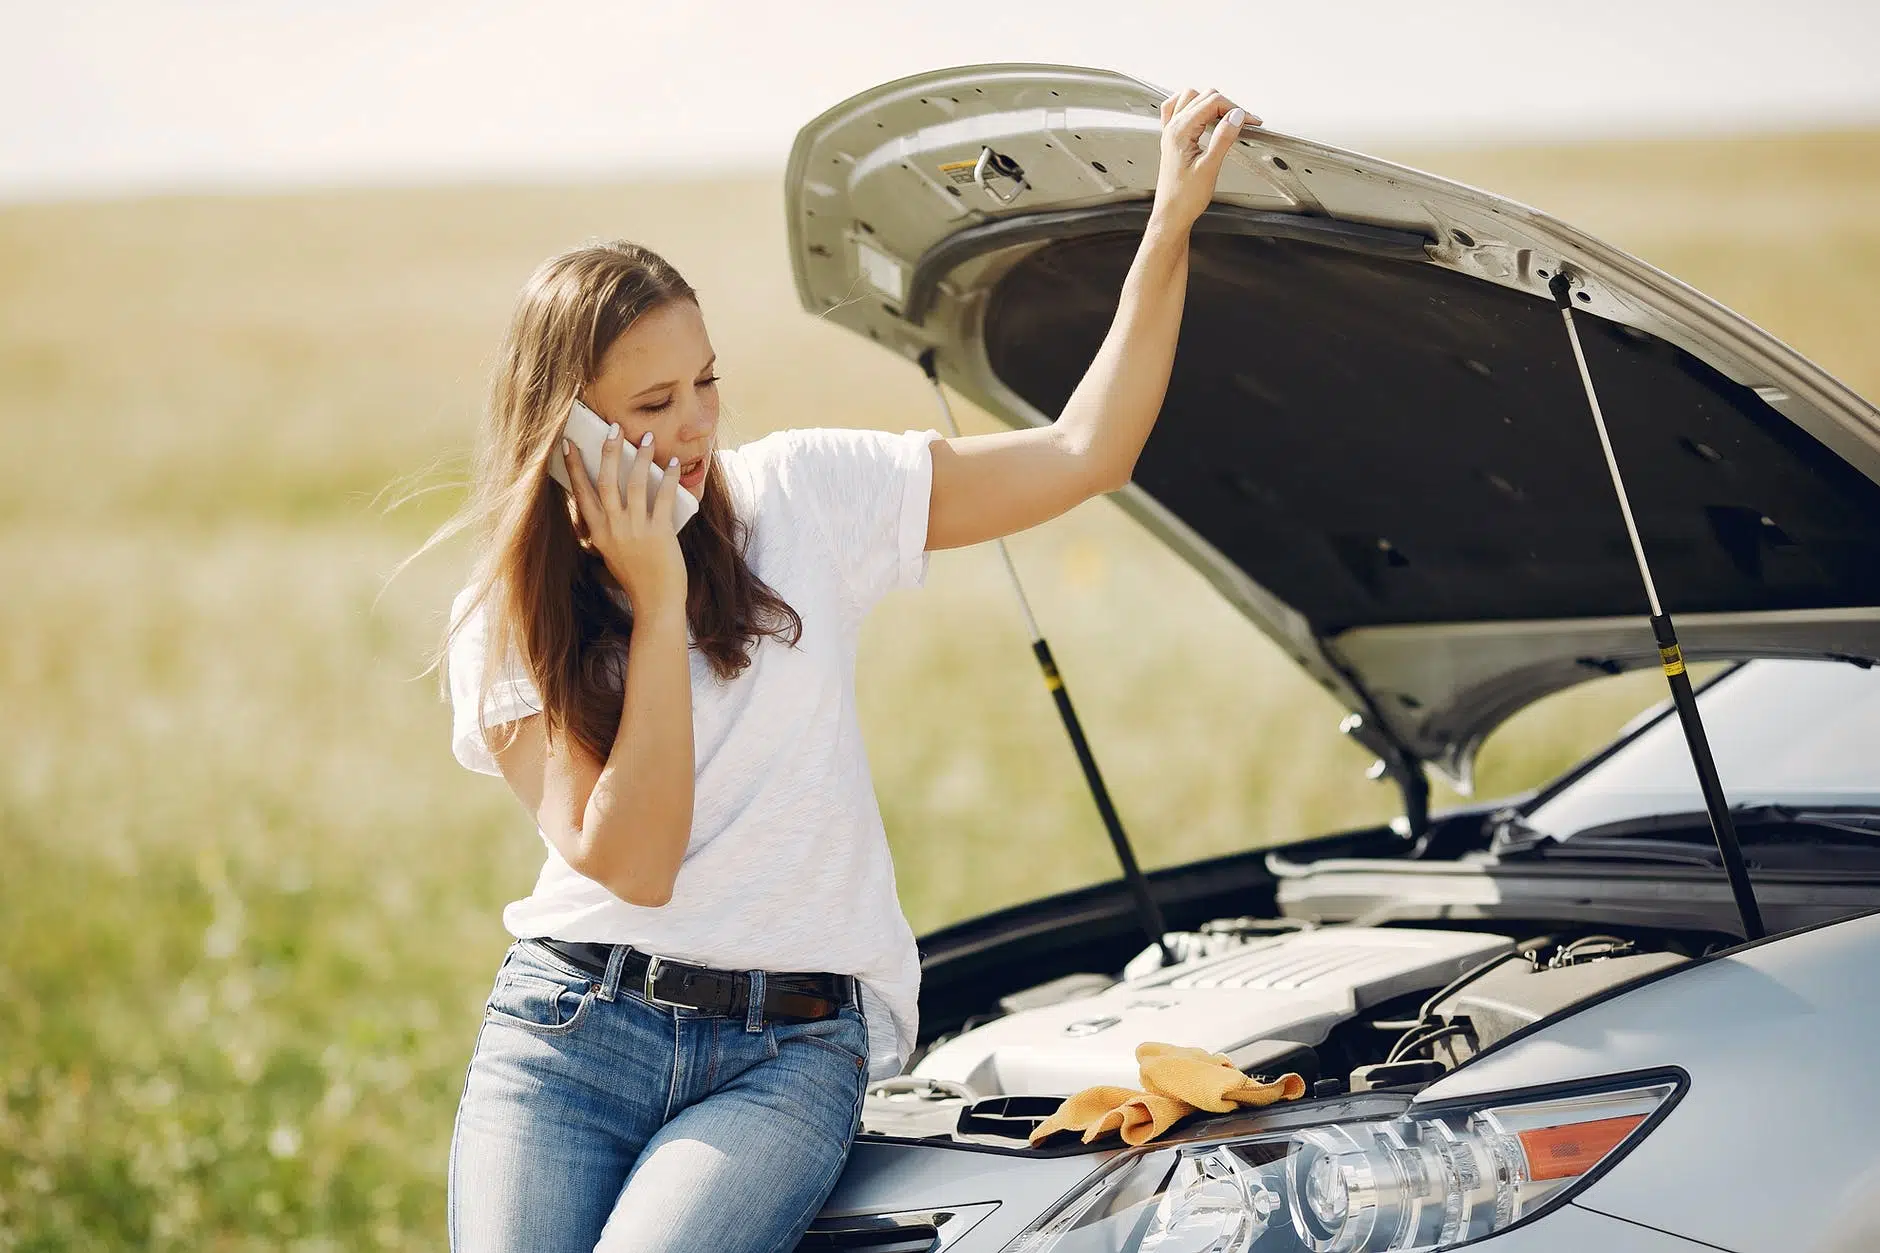 When you can't fix your dead car battery, call roadside assistance.